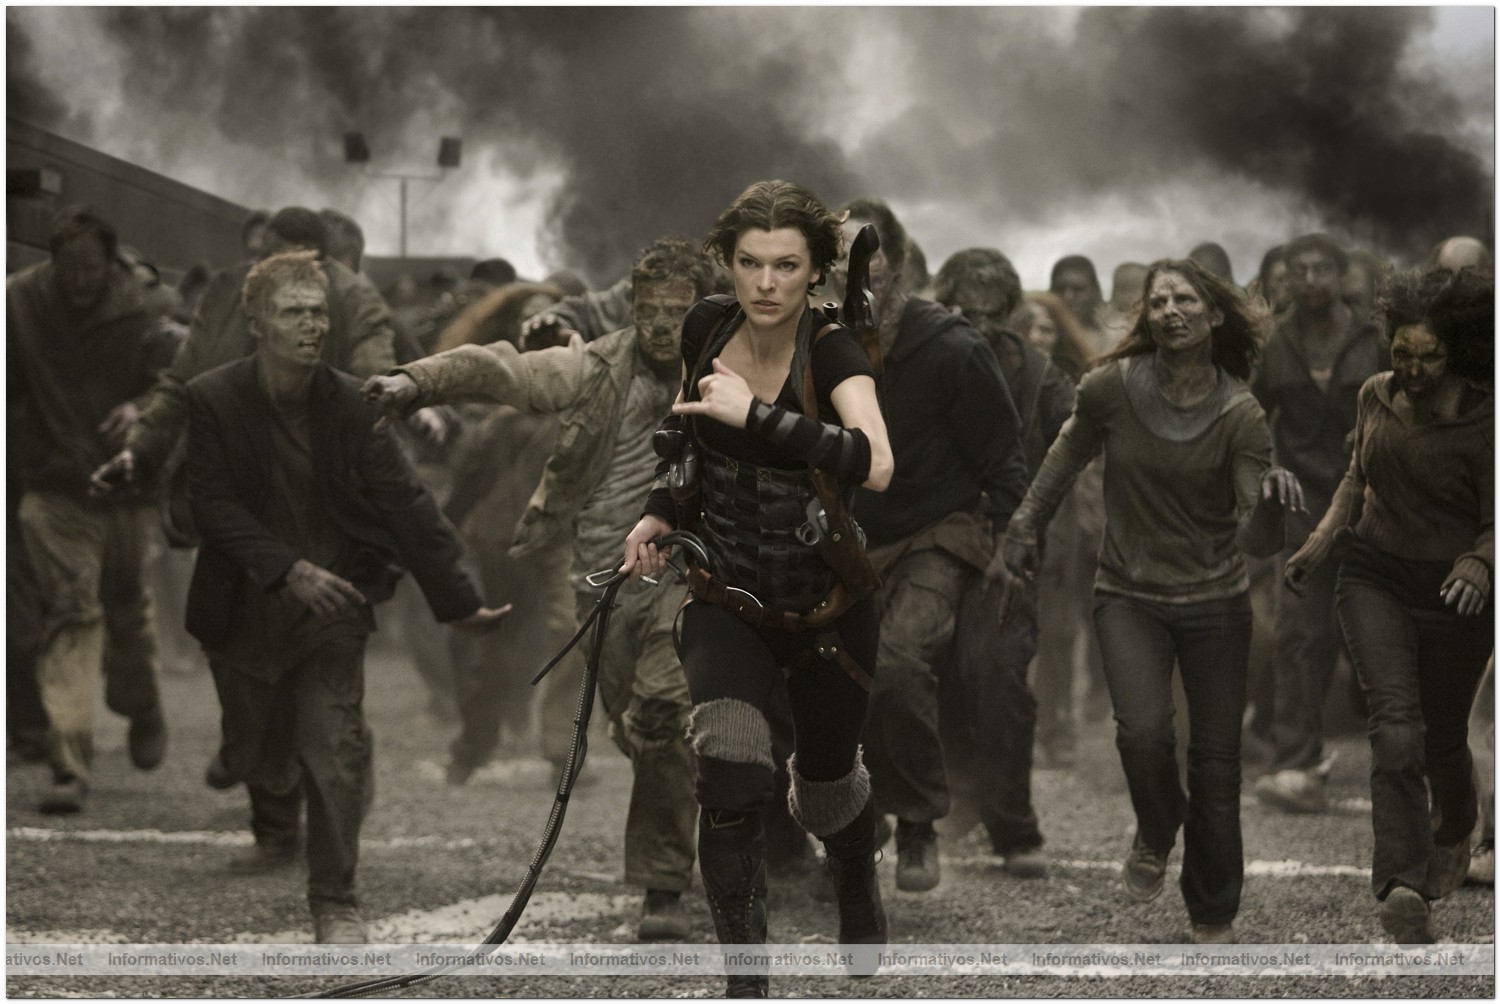 Milla Jovovich stars in Screen Gems' action horror RESIDENT EVIL: AFTERLIFE.